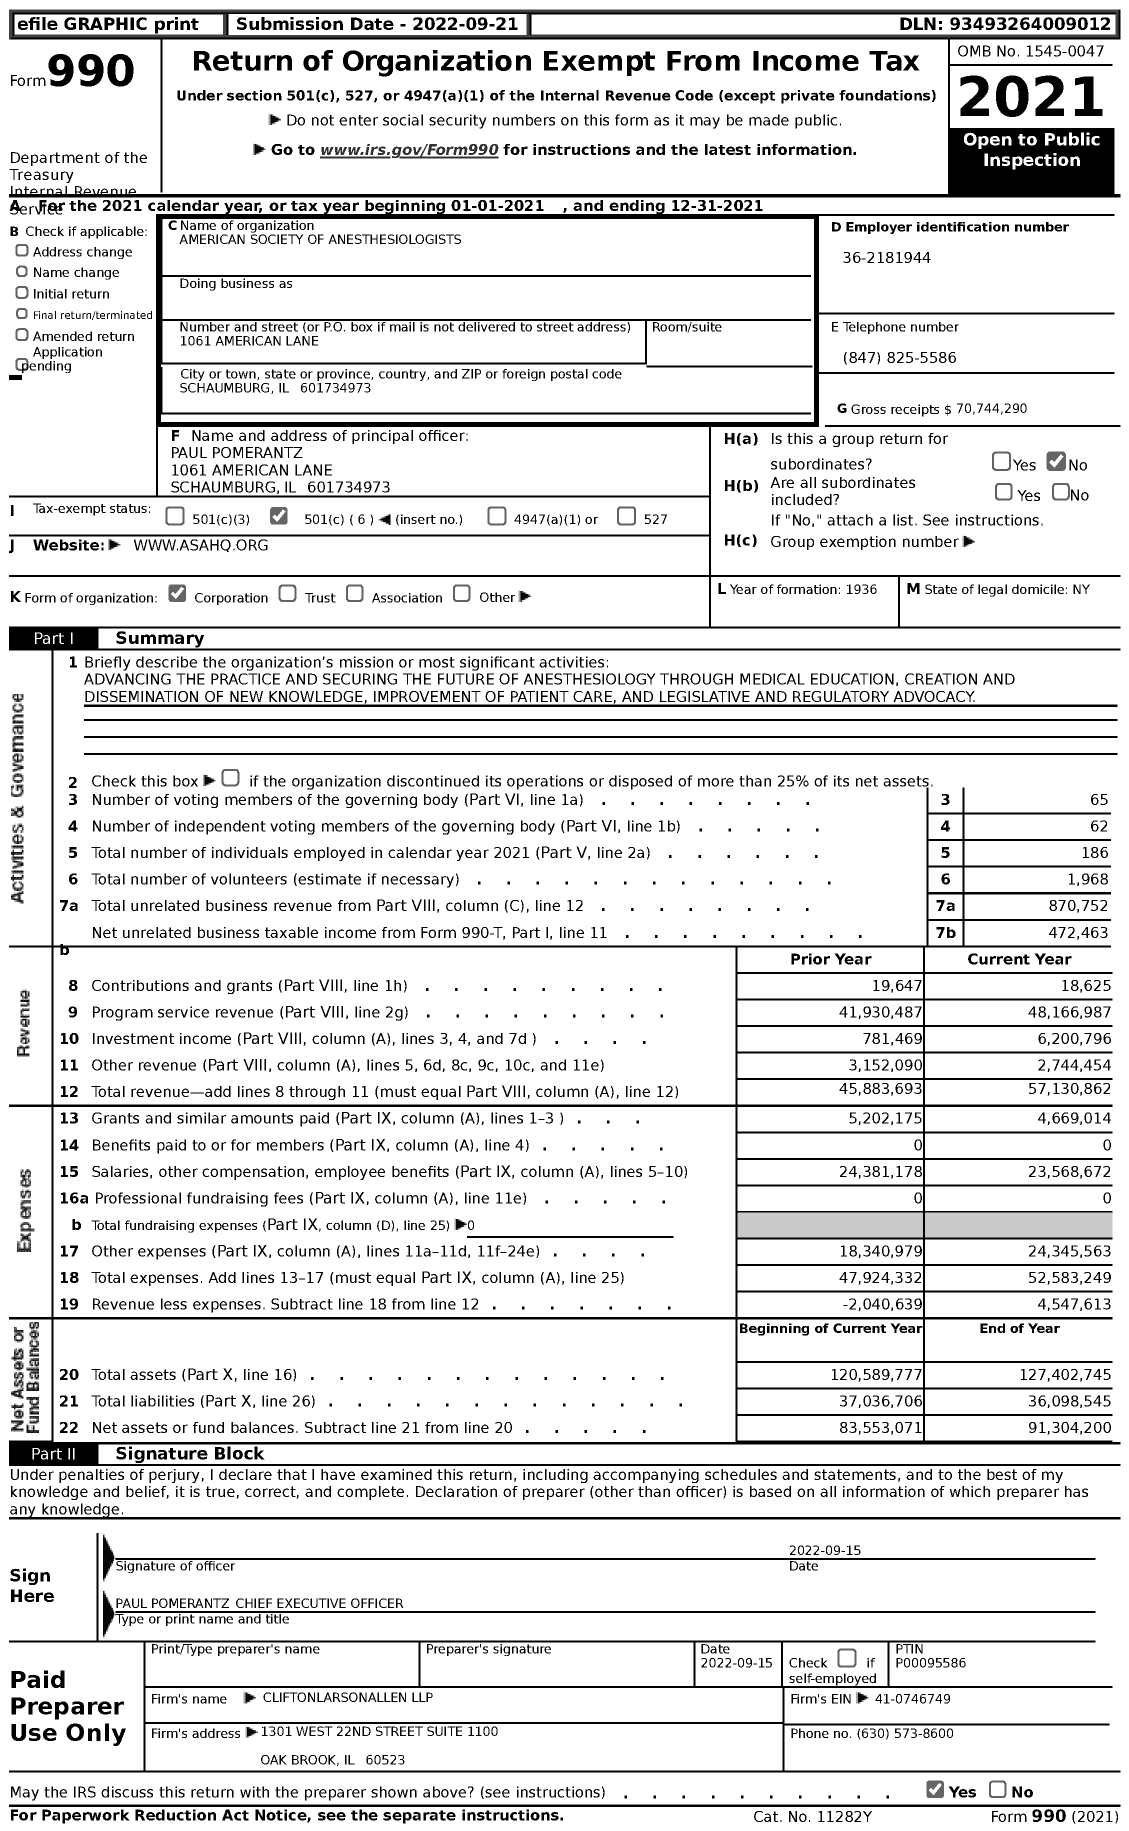 Image of first page of 2021 Form 990 for American Society of Anesthesiologists (ASA)